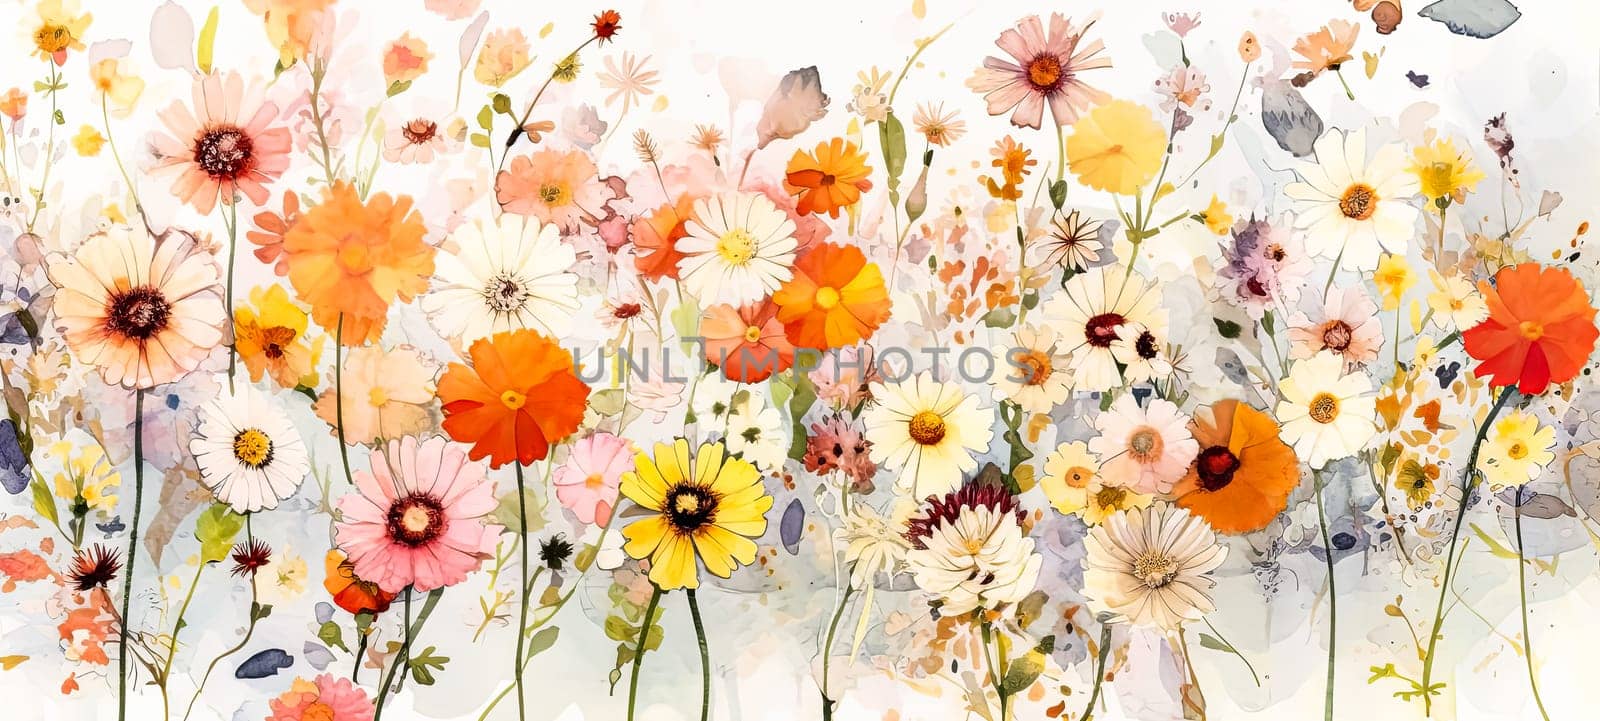 A field of yellow flowers with a white background. The flowers are in full bloom and the grass is tall. Concept of warmth and happiness, as the bright colors of the flowers